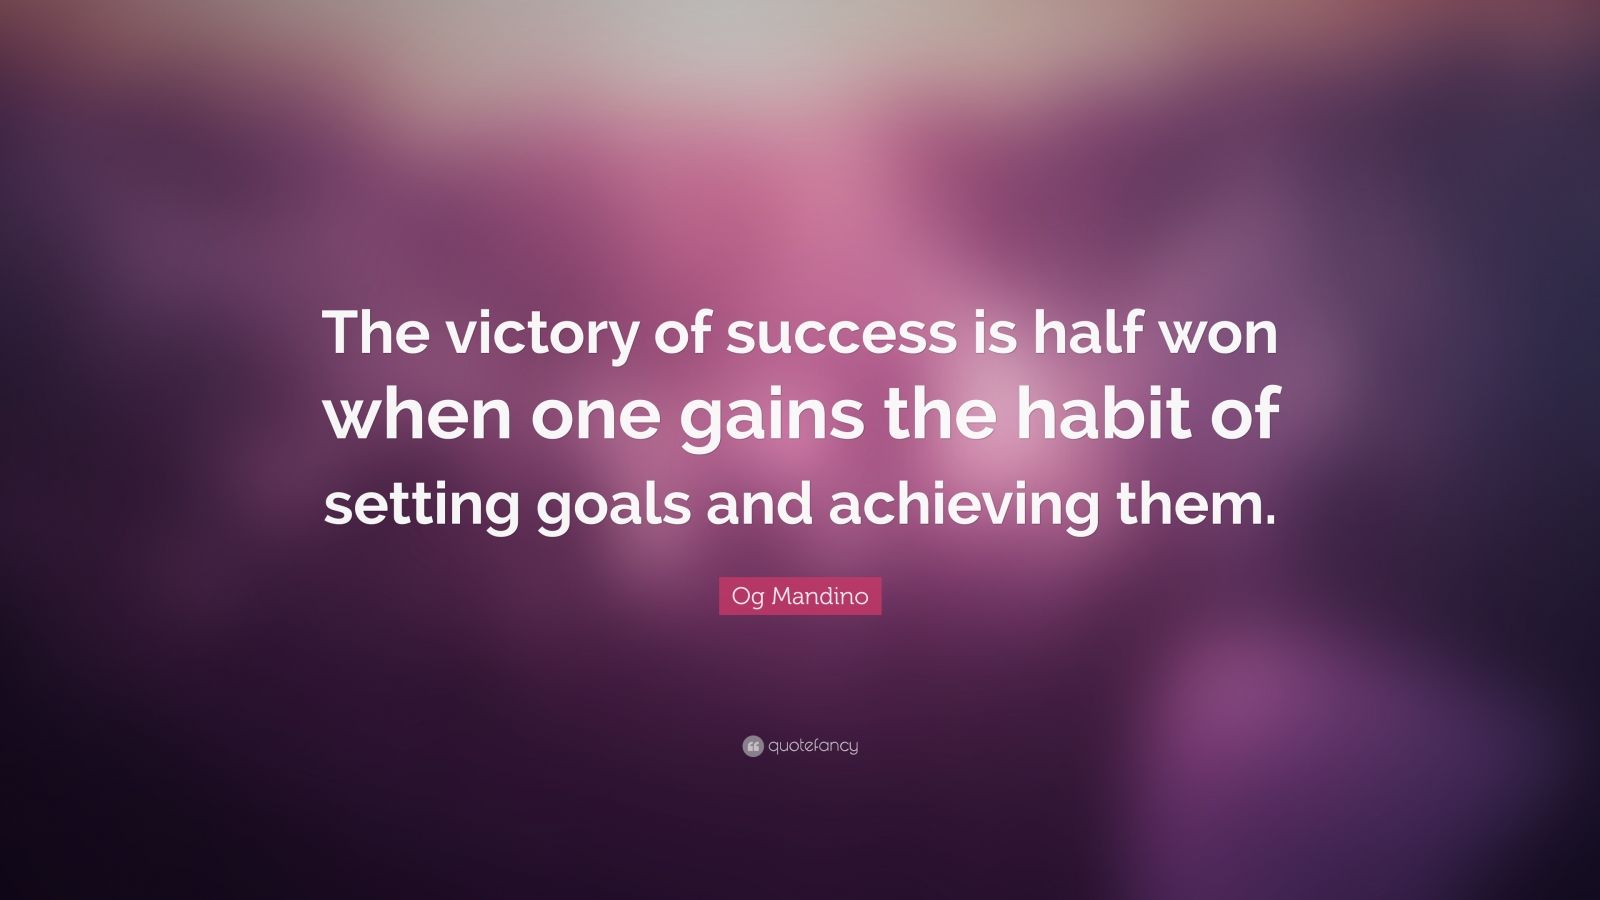 Og Mandino Quote: “The victory of success is half won when one gains ...